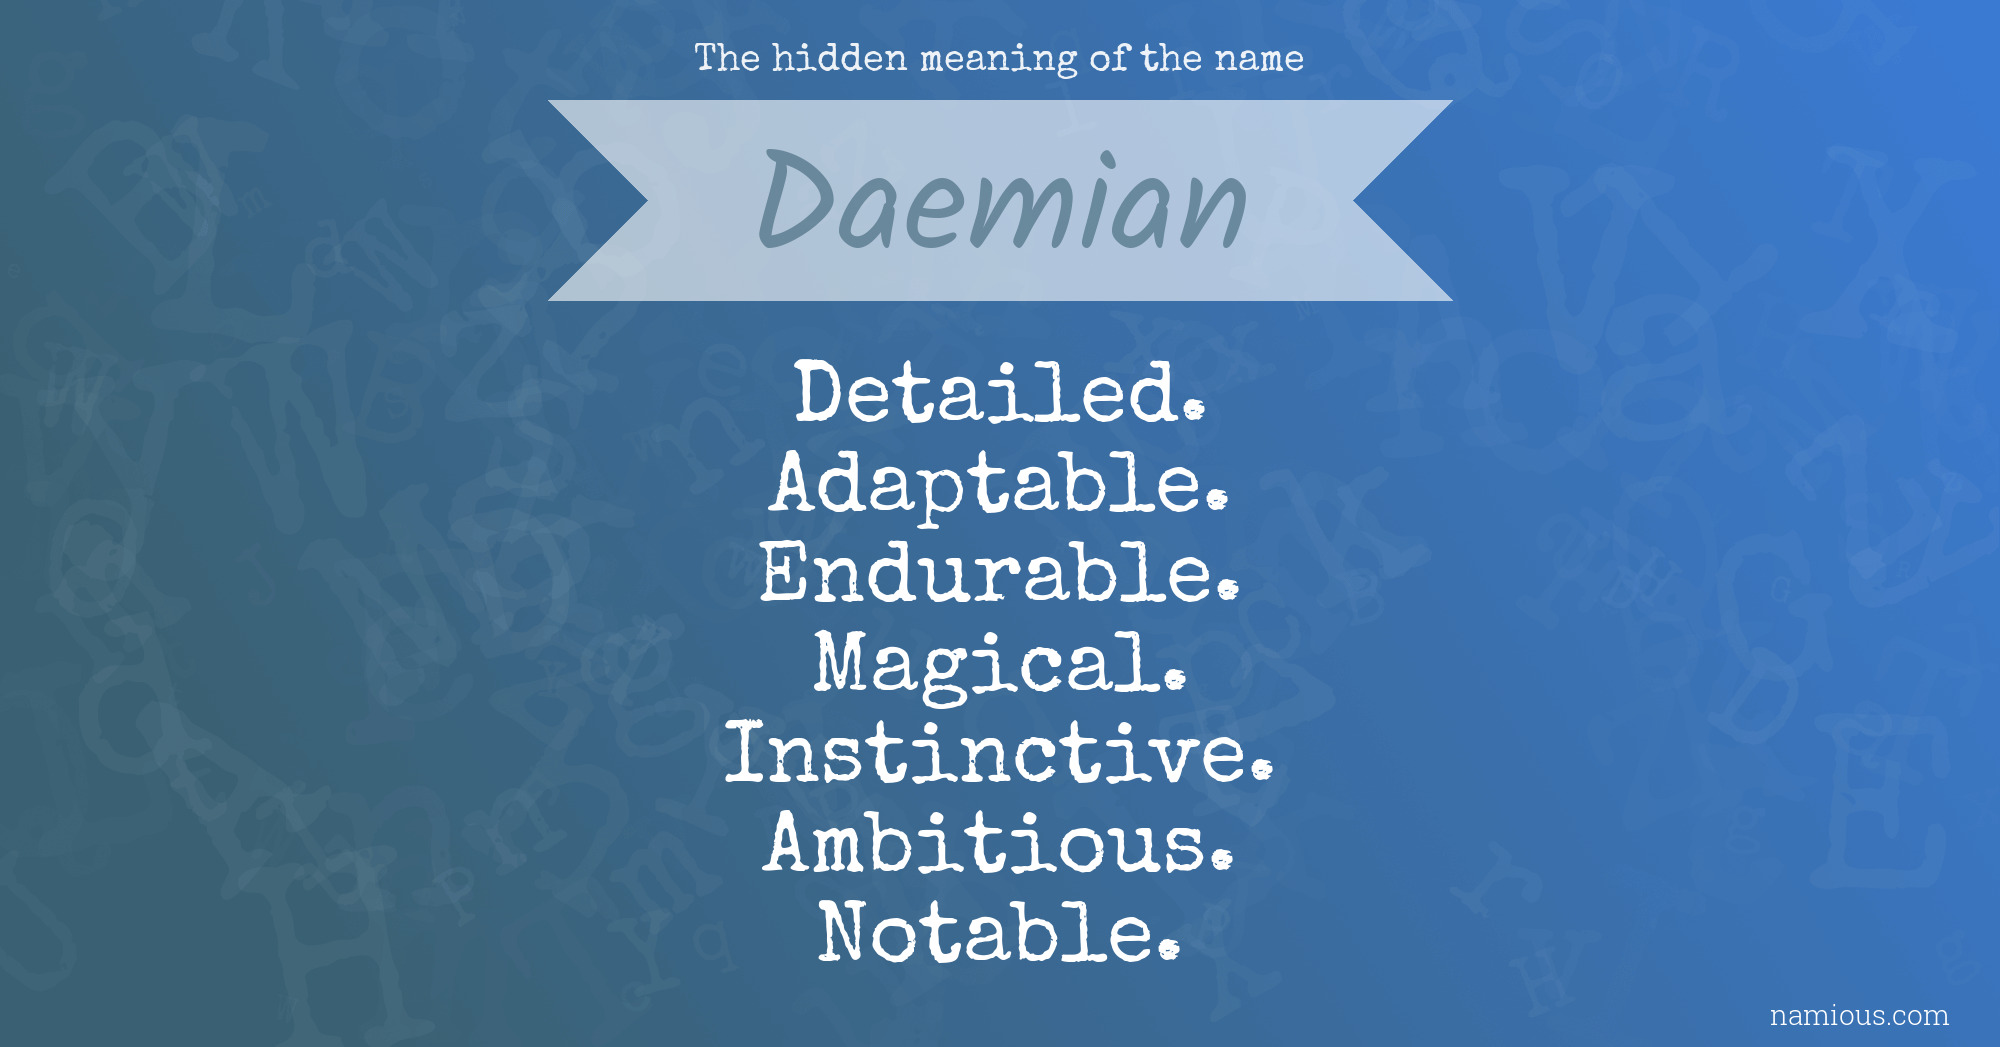 The hidden meaning of the name Daemian